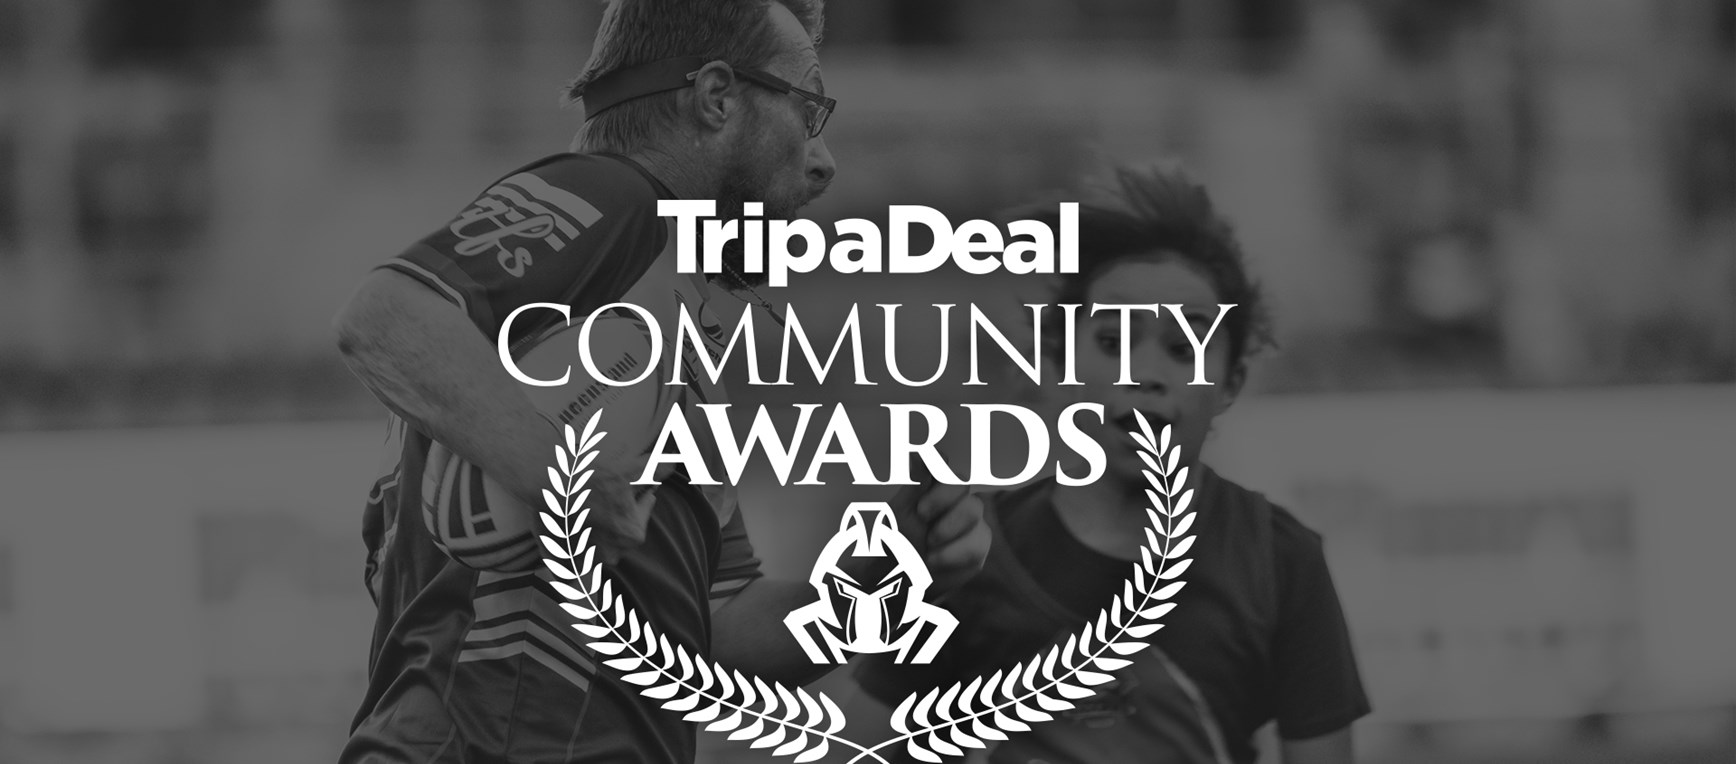 GALLERY: TRIP A DEAL Community Awards